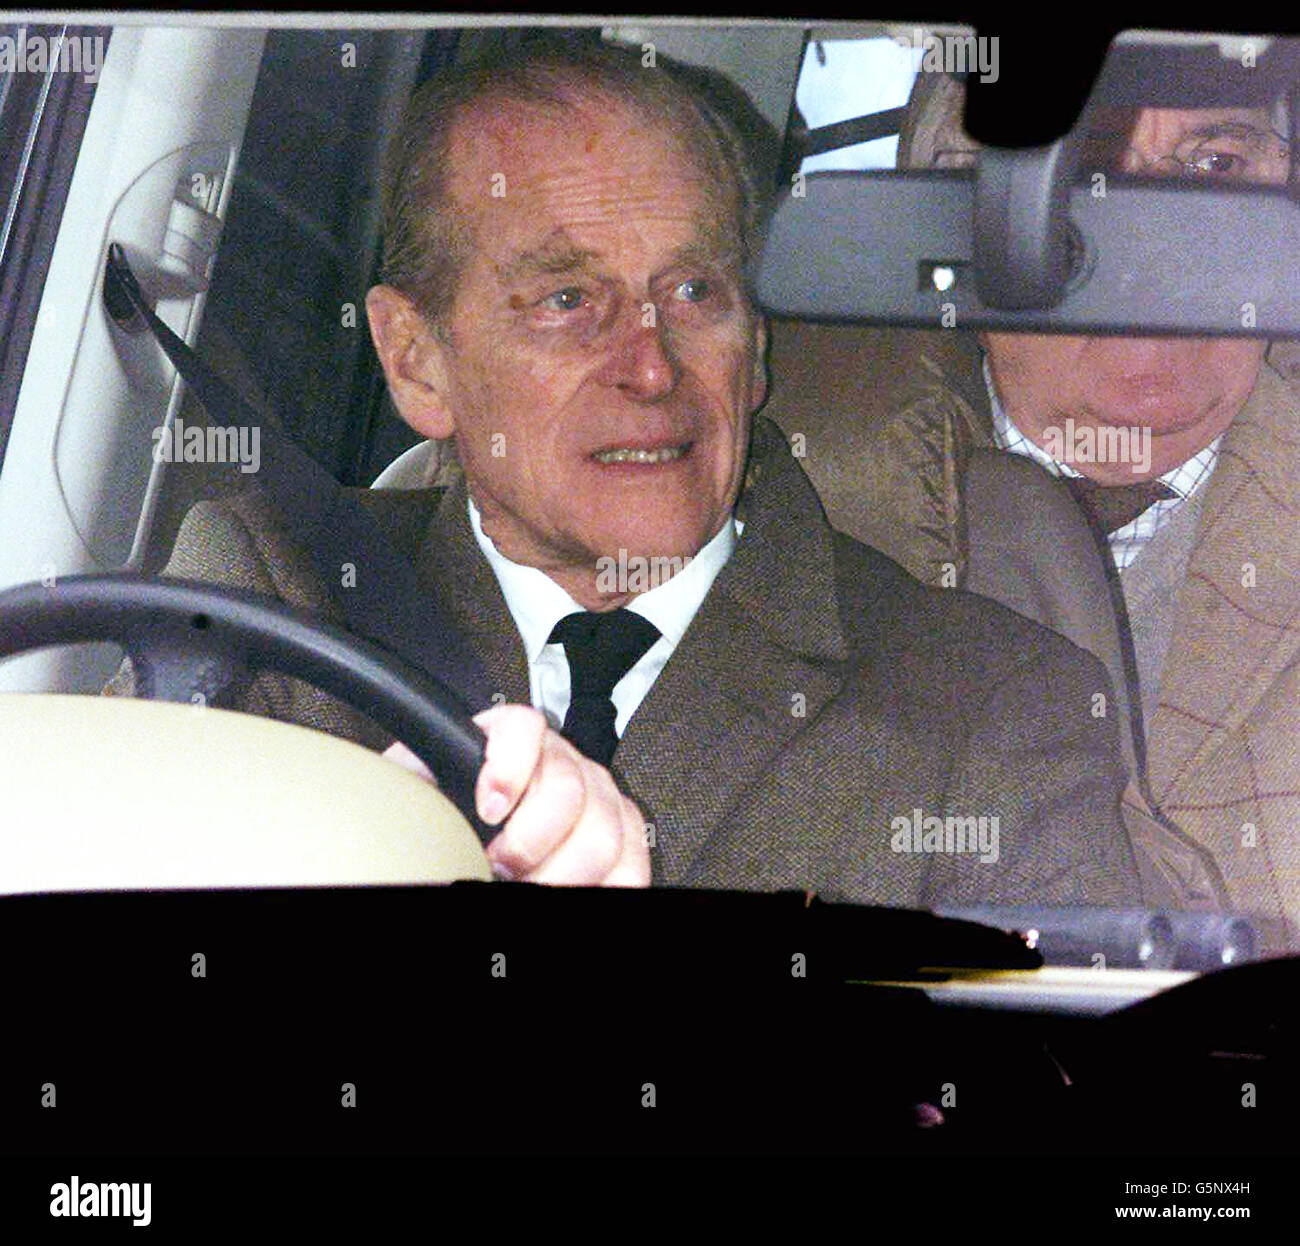 The Duke of Edinburgh drives from Sandringham Parish Church after attending morning service the day after the death of 71 year-old Princess Margaret - the sister of Britain's Queen Elizabeth II. Stock Photo